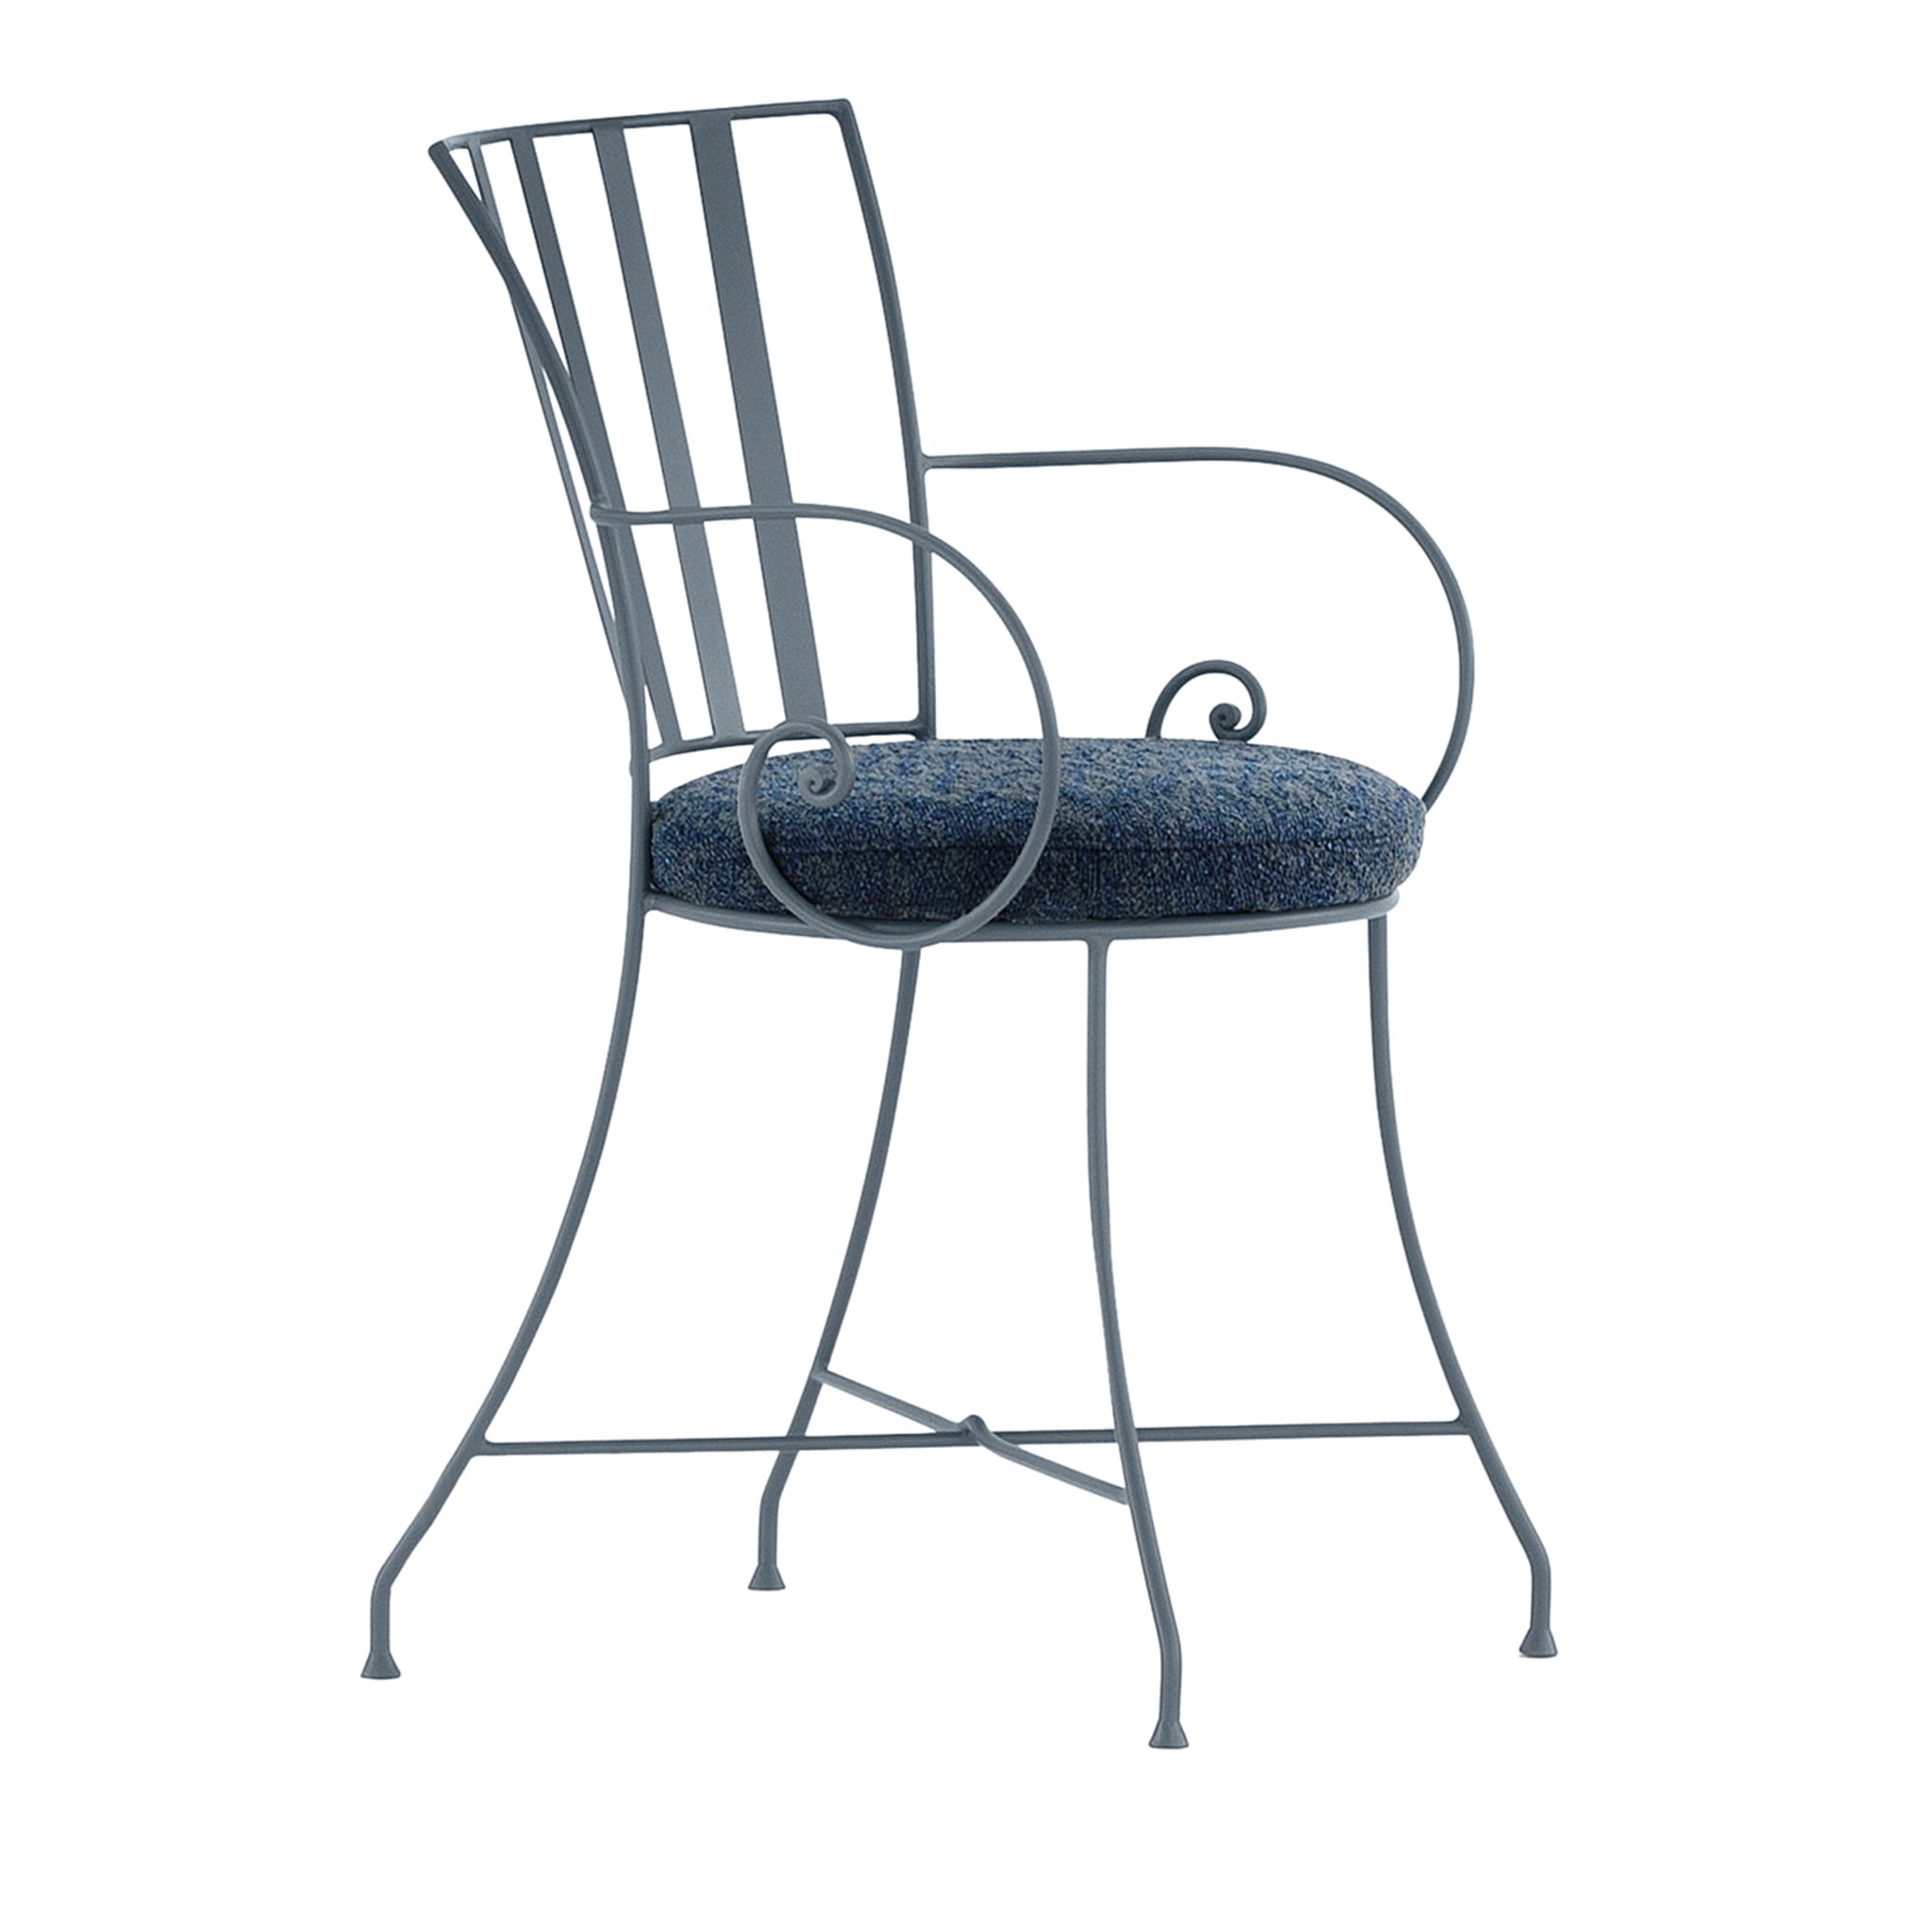 Attonita Wrought Iron Slate-Blue Chair With Armrests - Main view